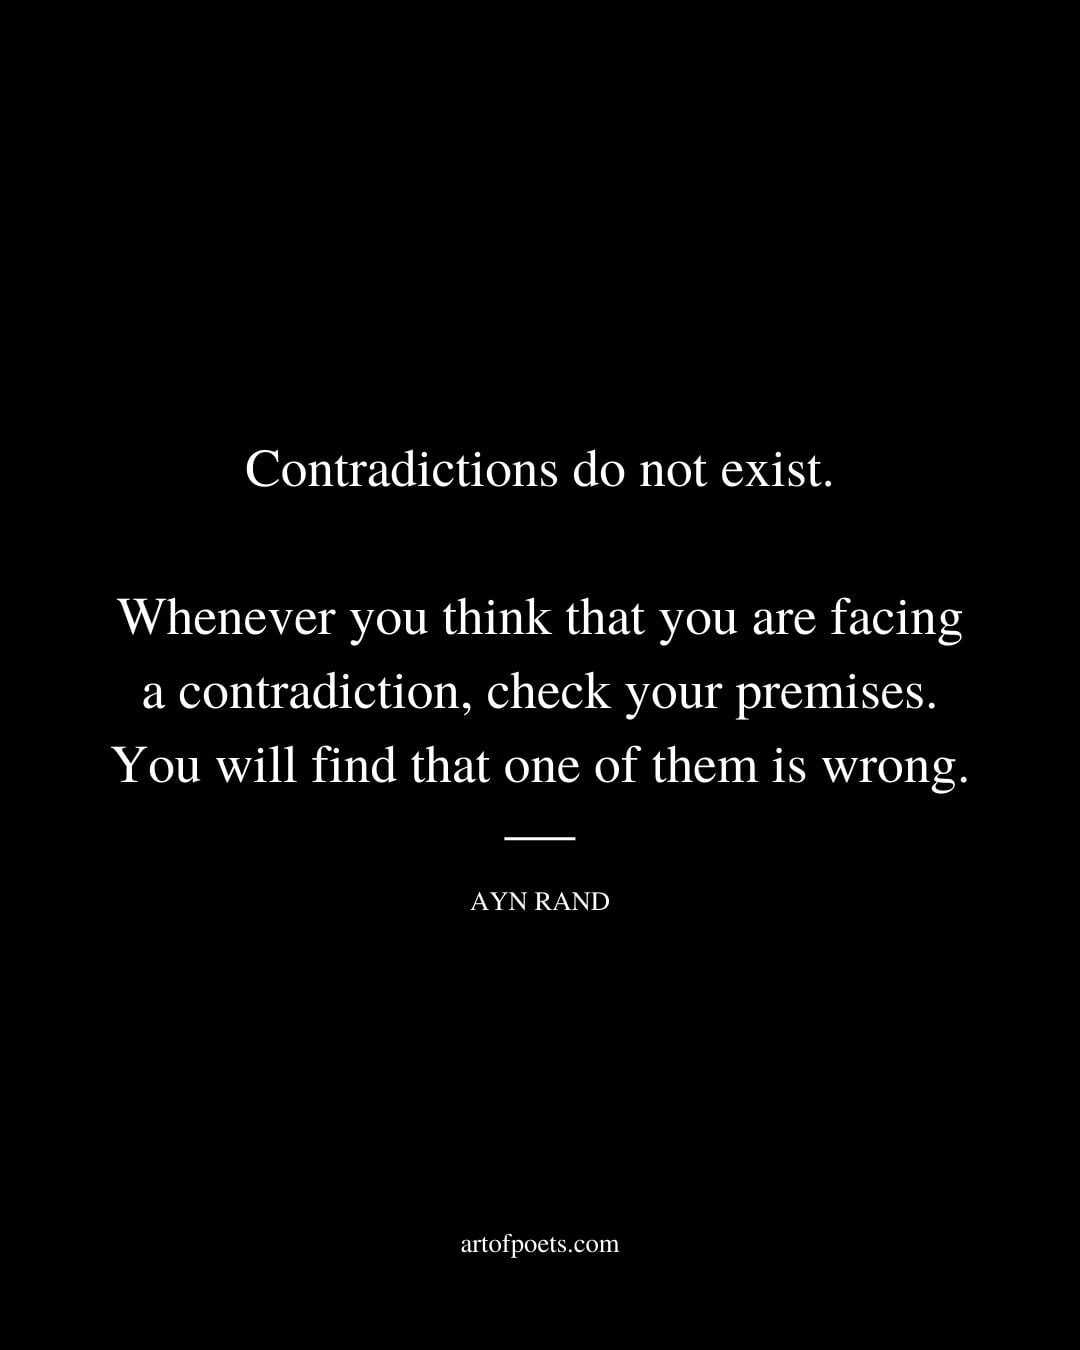 Contradictions do not exist. Whenever you think that you are facing a contradiction check your premises. You will find that one of them is wrong